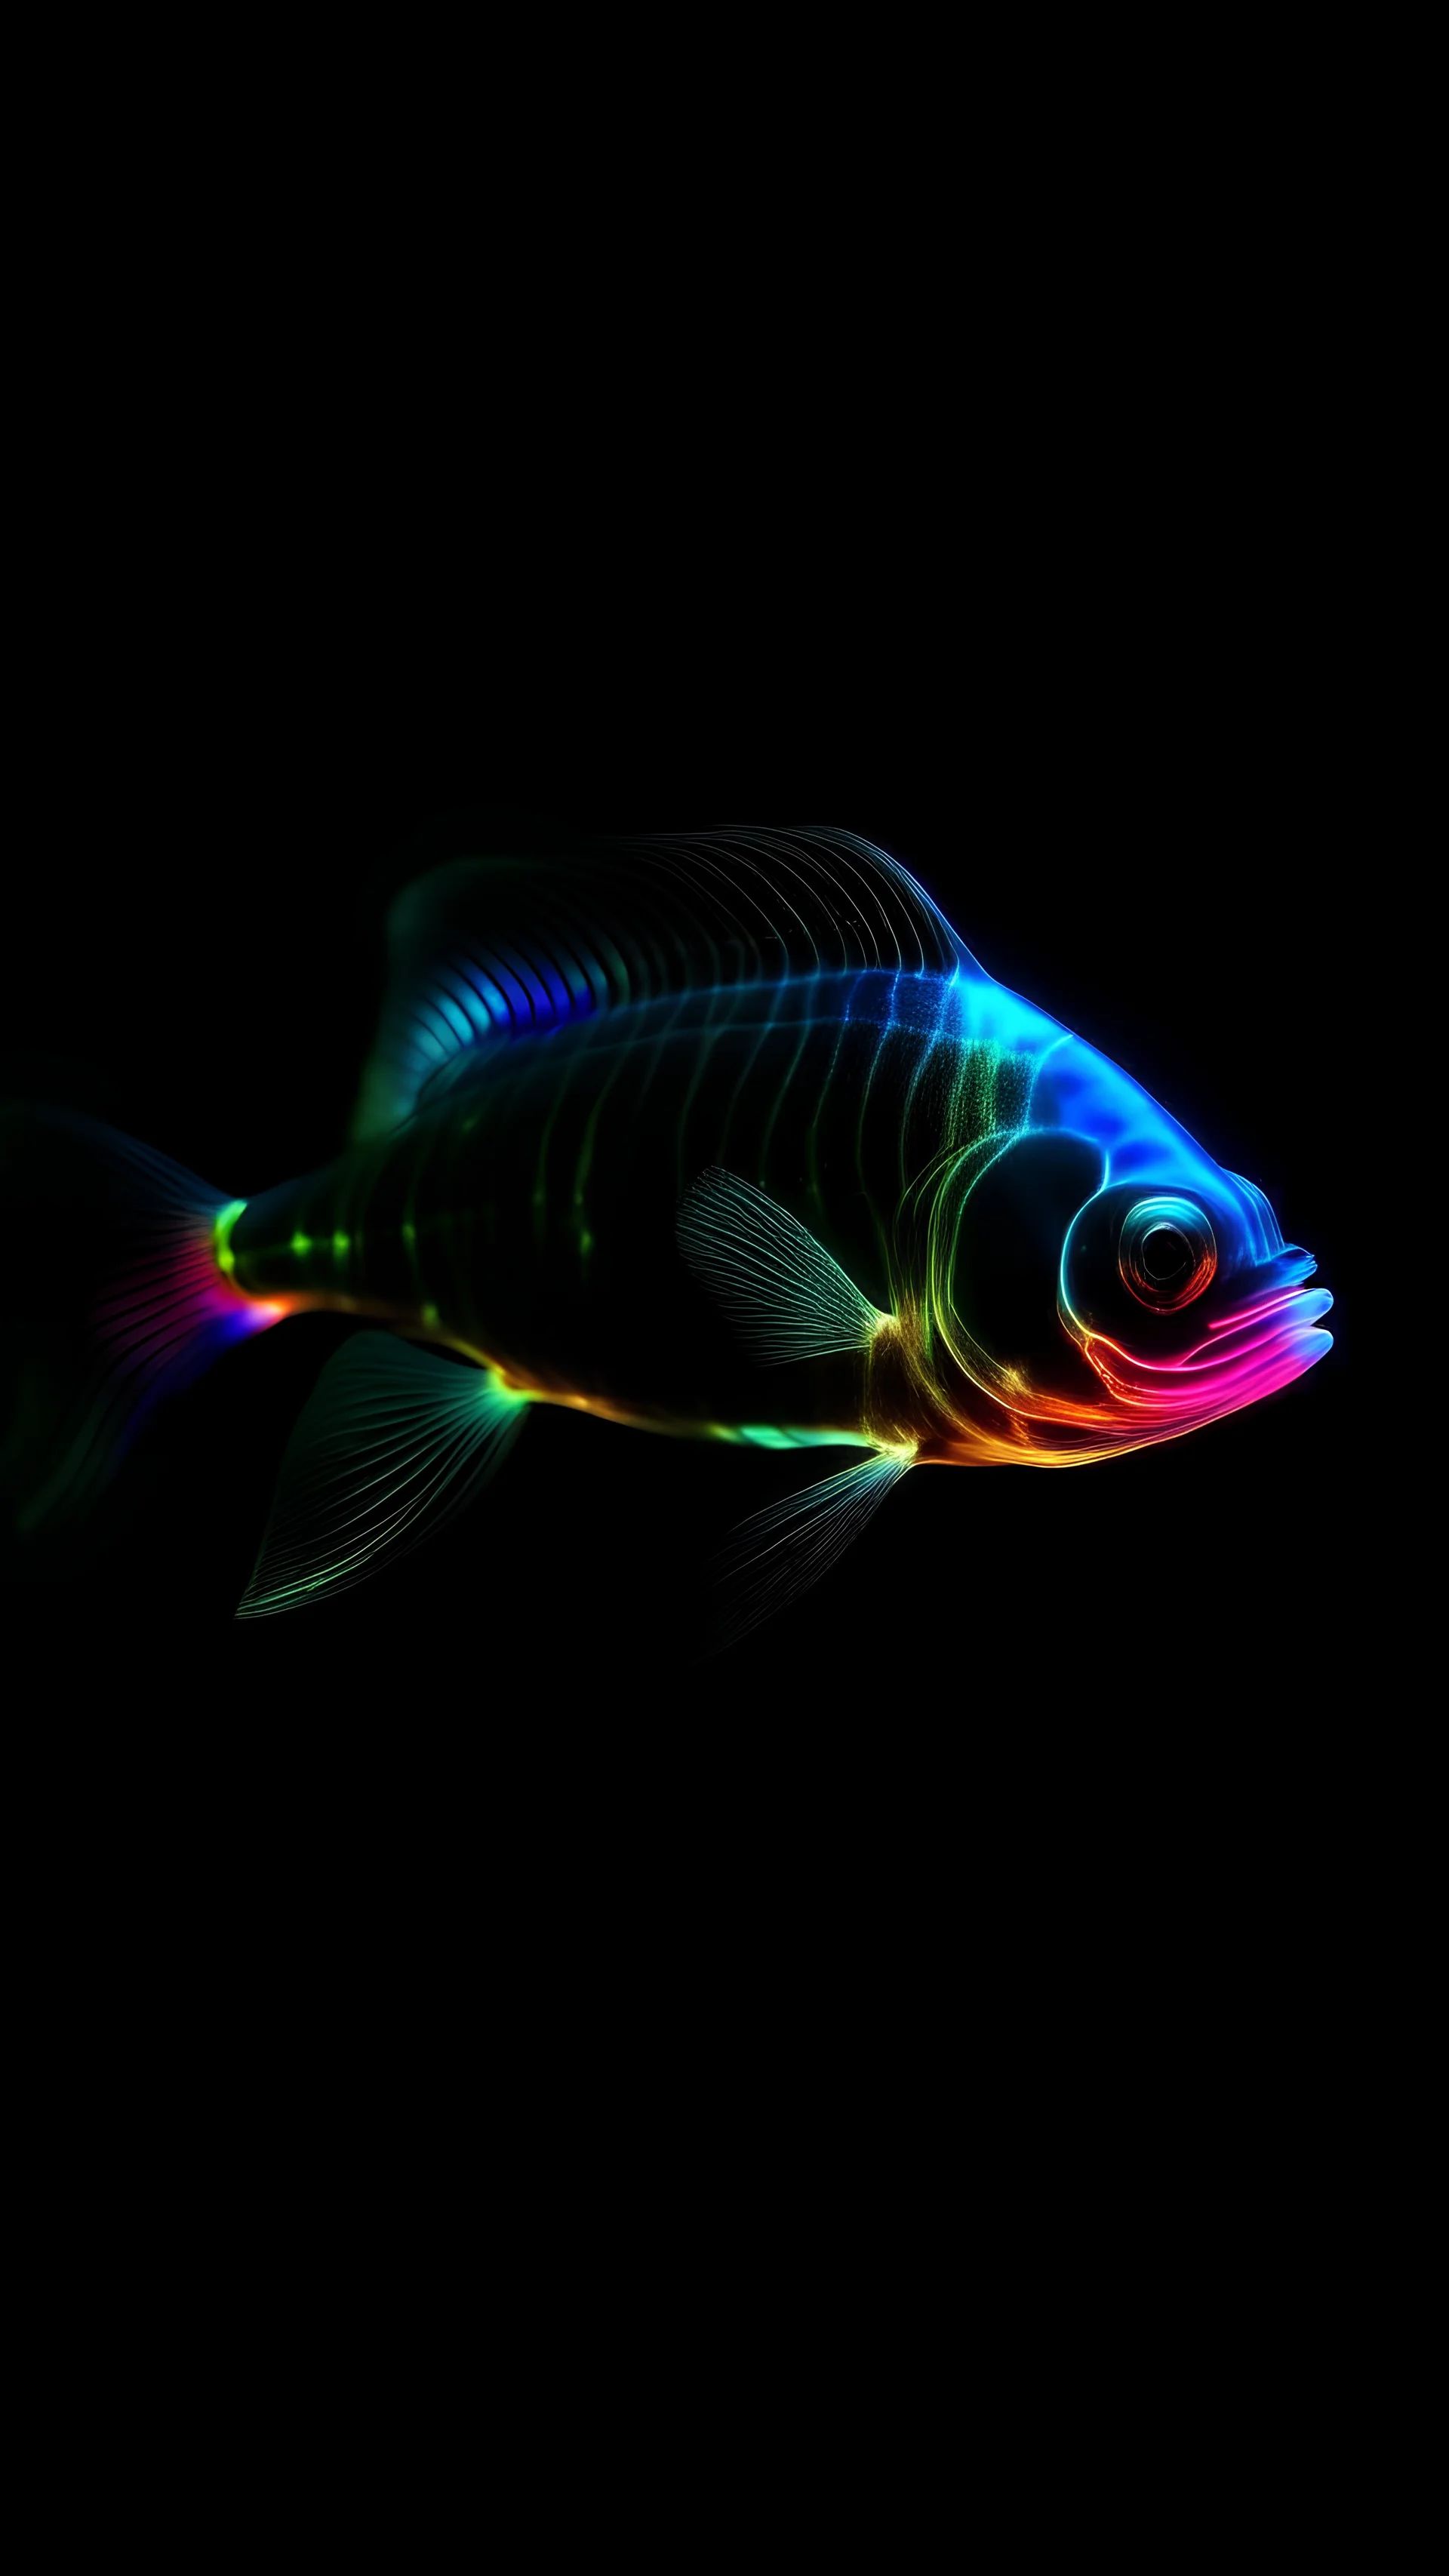 a fantastic and wonderful multicolor Bioluminescent aquatic fish like creature from the abyss on a plain black background